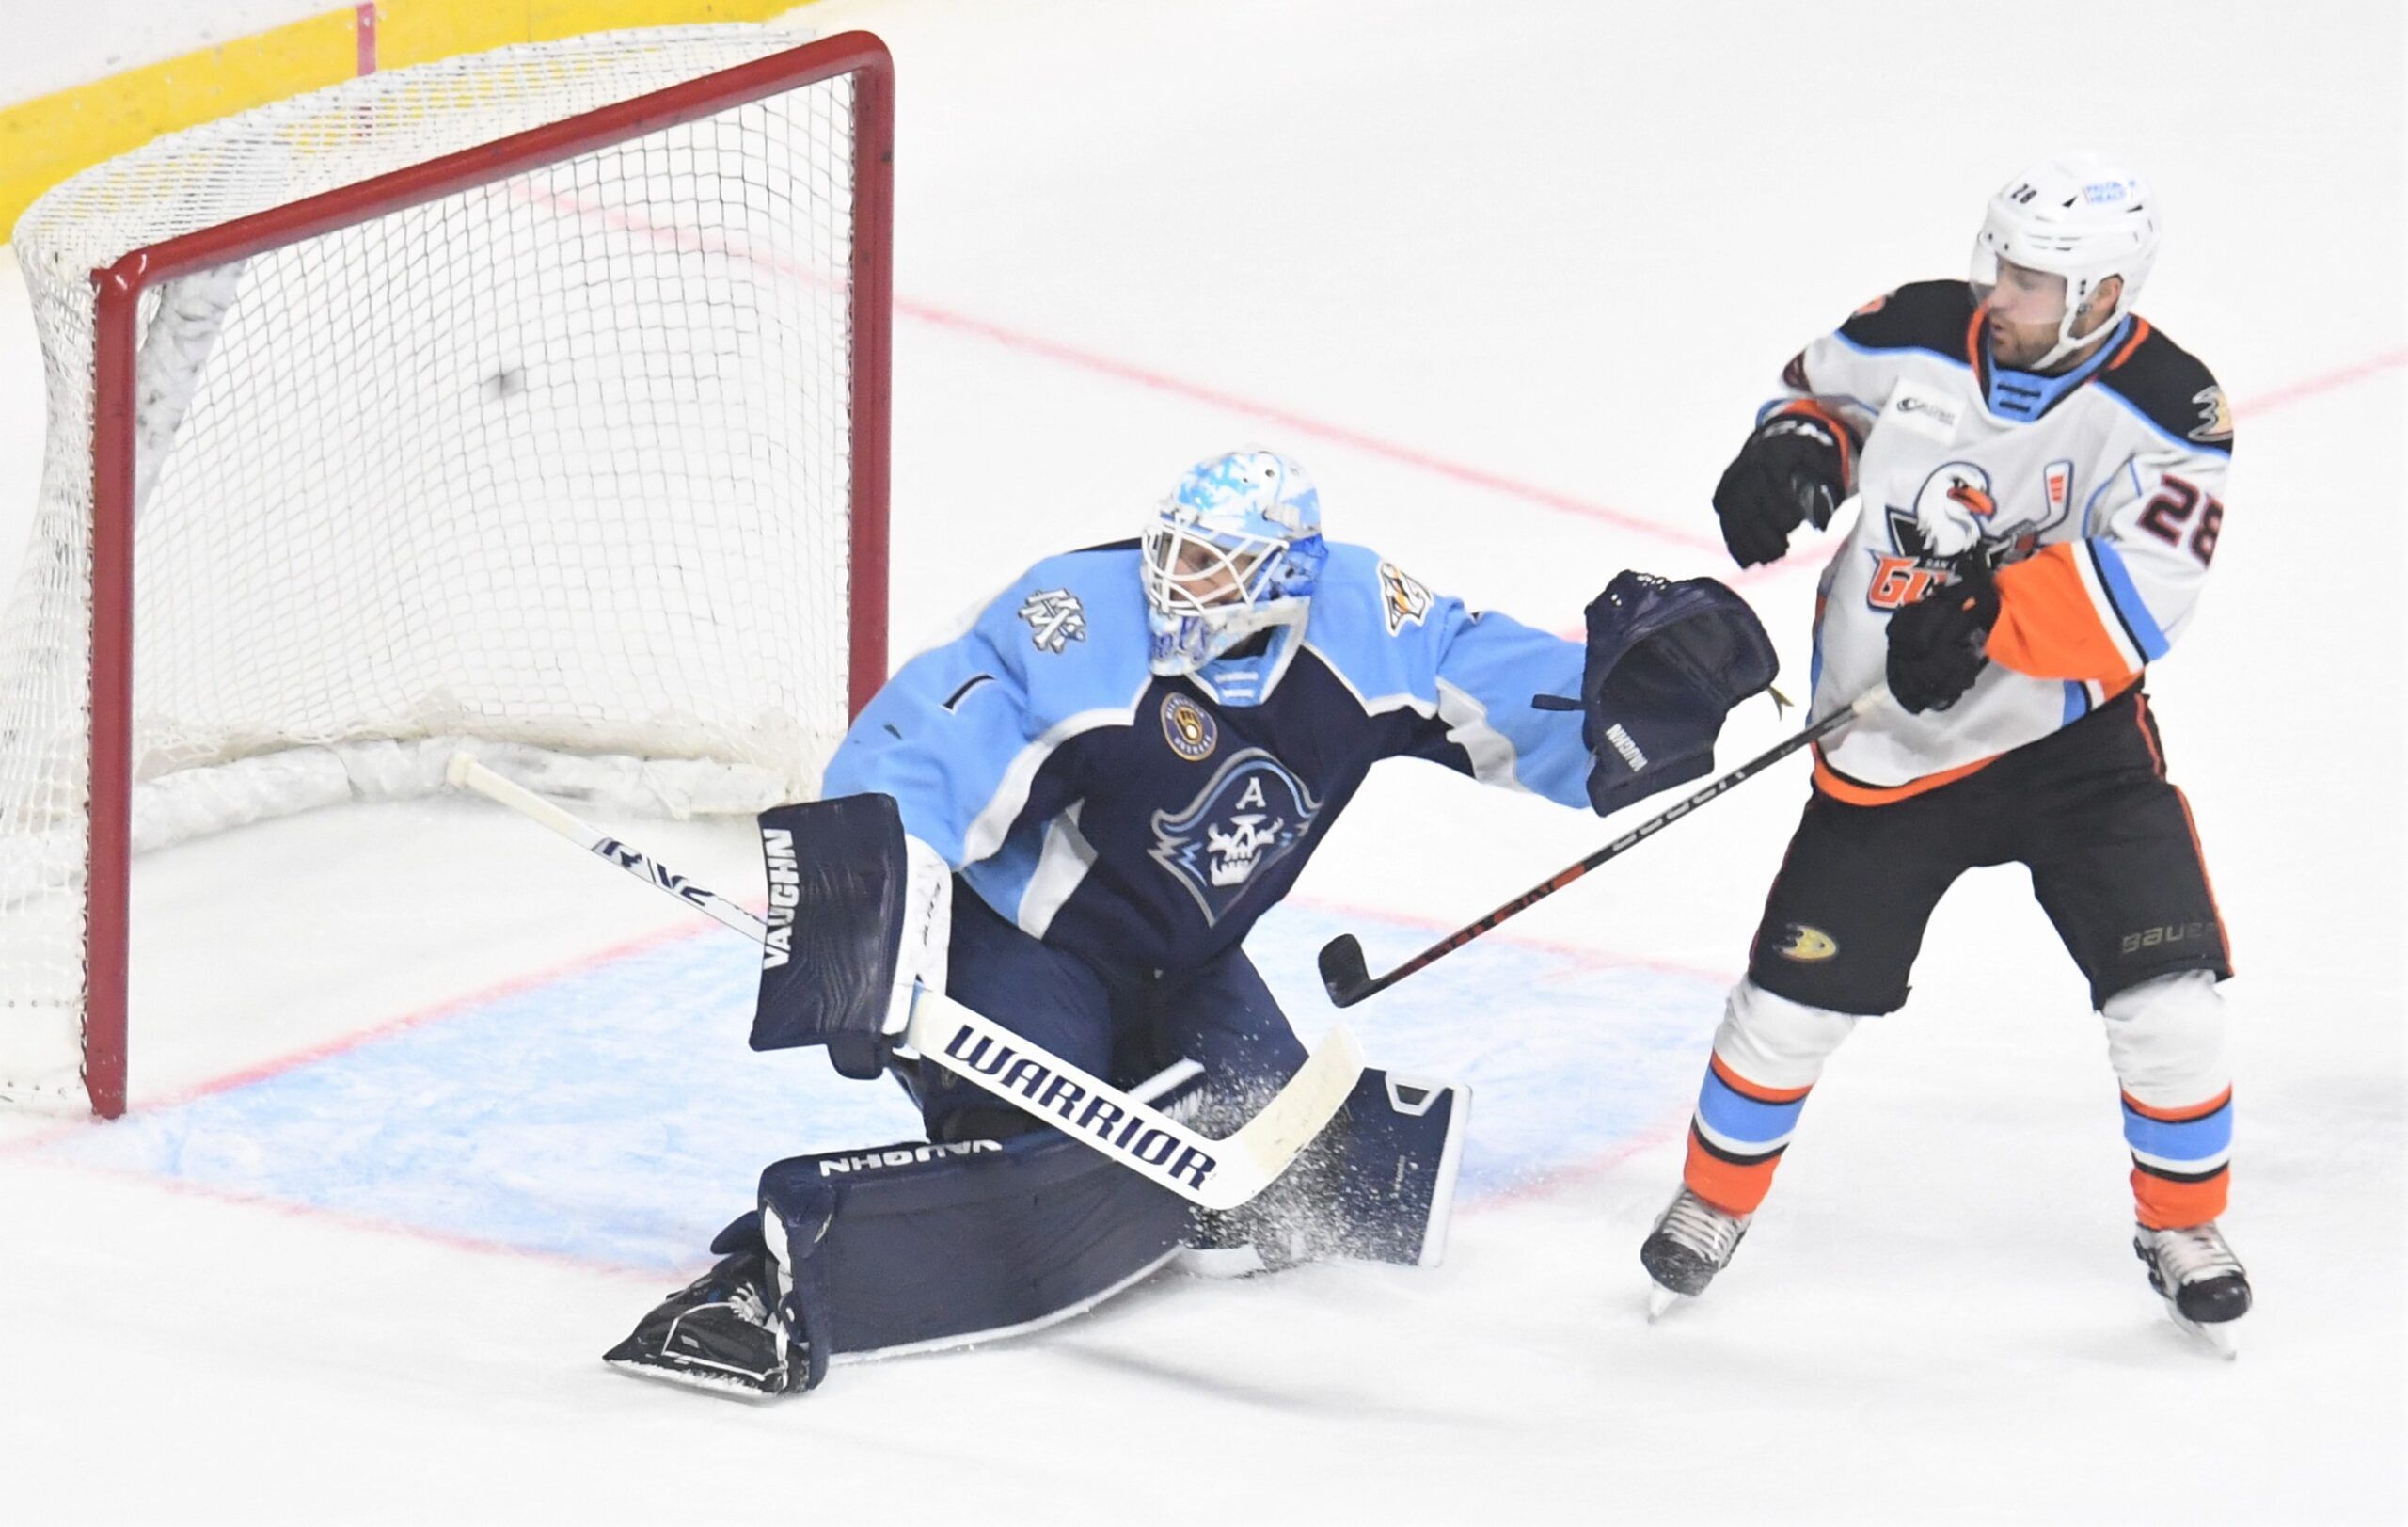 San Diego Gulls To Host First-Ever Mexican Heritage Night This Saturday,  Nov. 5